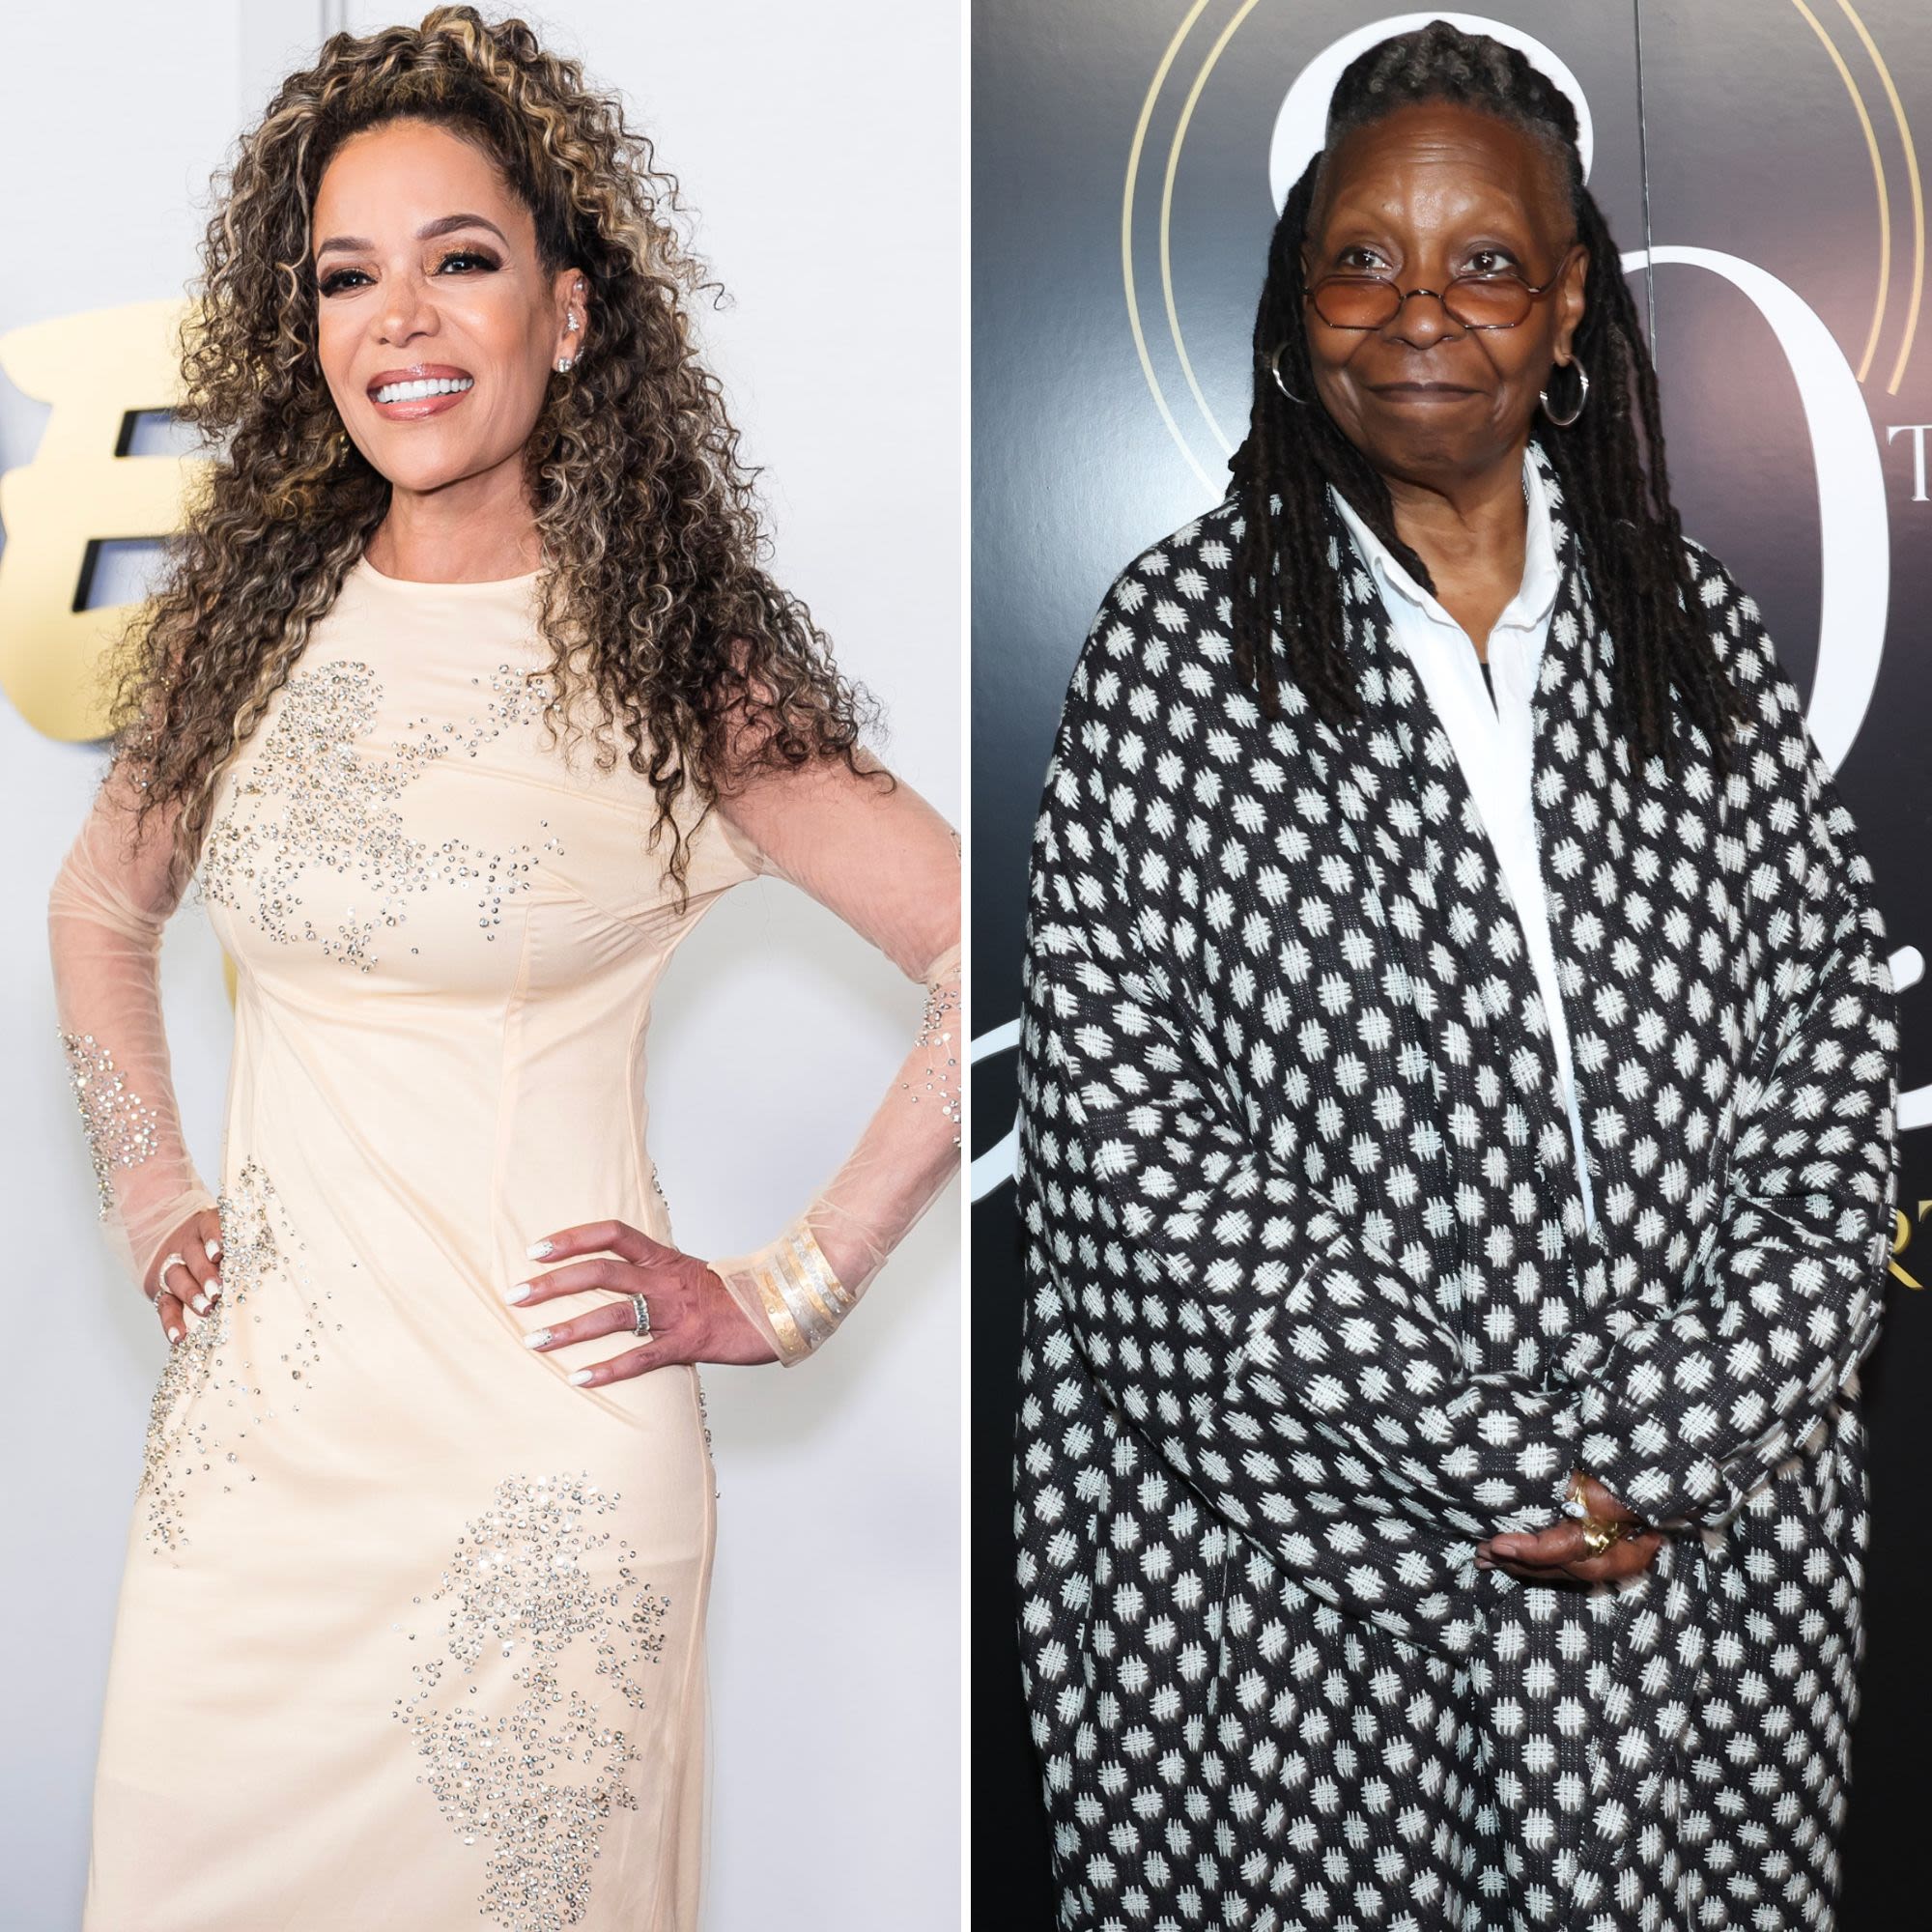 Sunny Hostin Wants ‘The View’ Cohost Whoopi Goldberg to Star in Her New Amazon Series